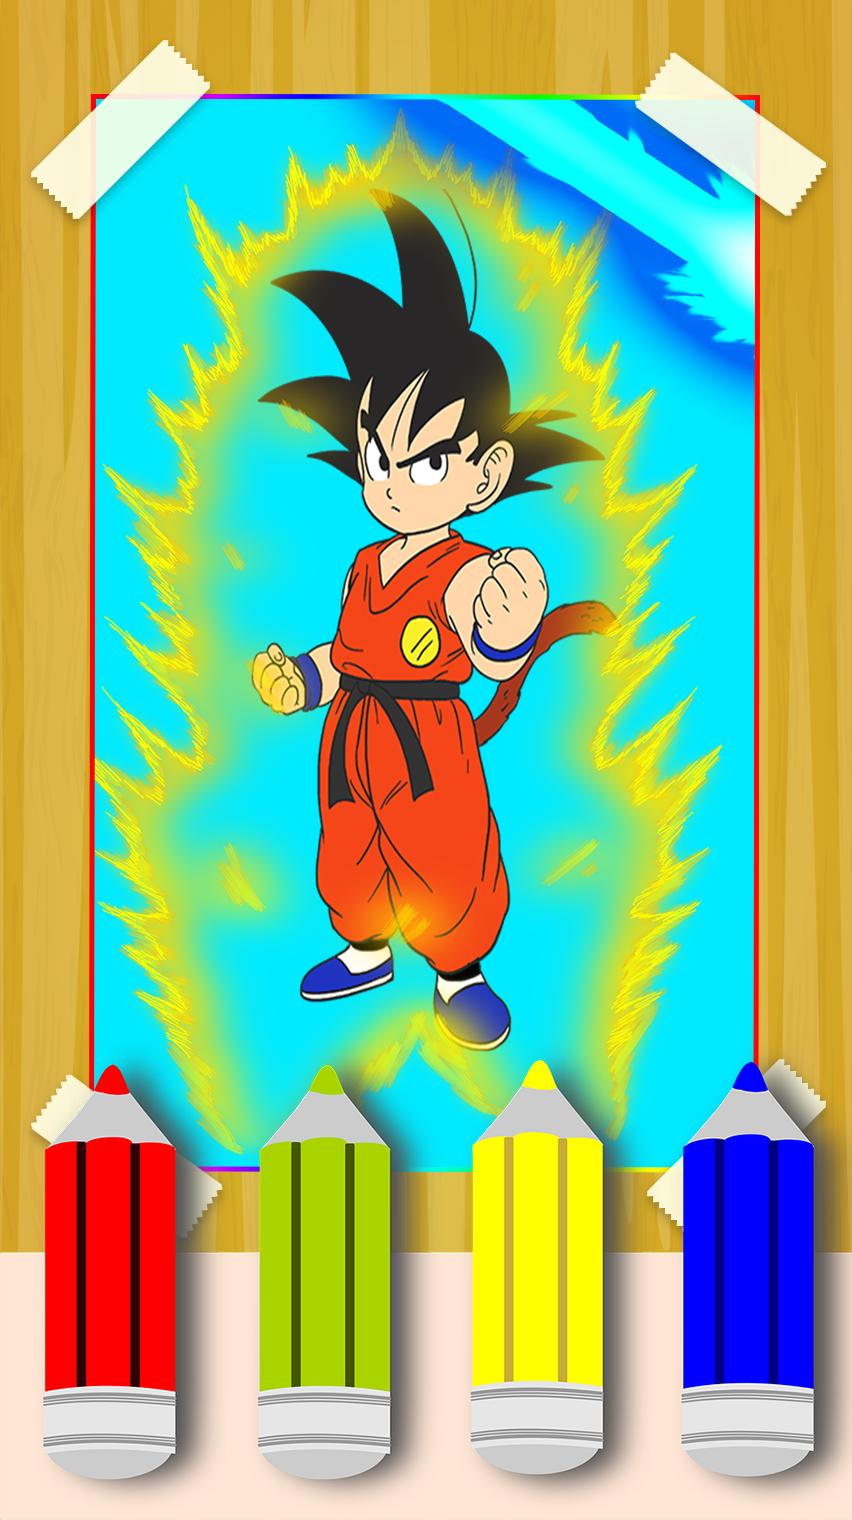 Come Disegnare Son Goku Vegeta For Android Apk Download